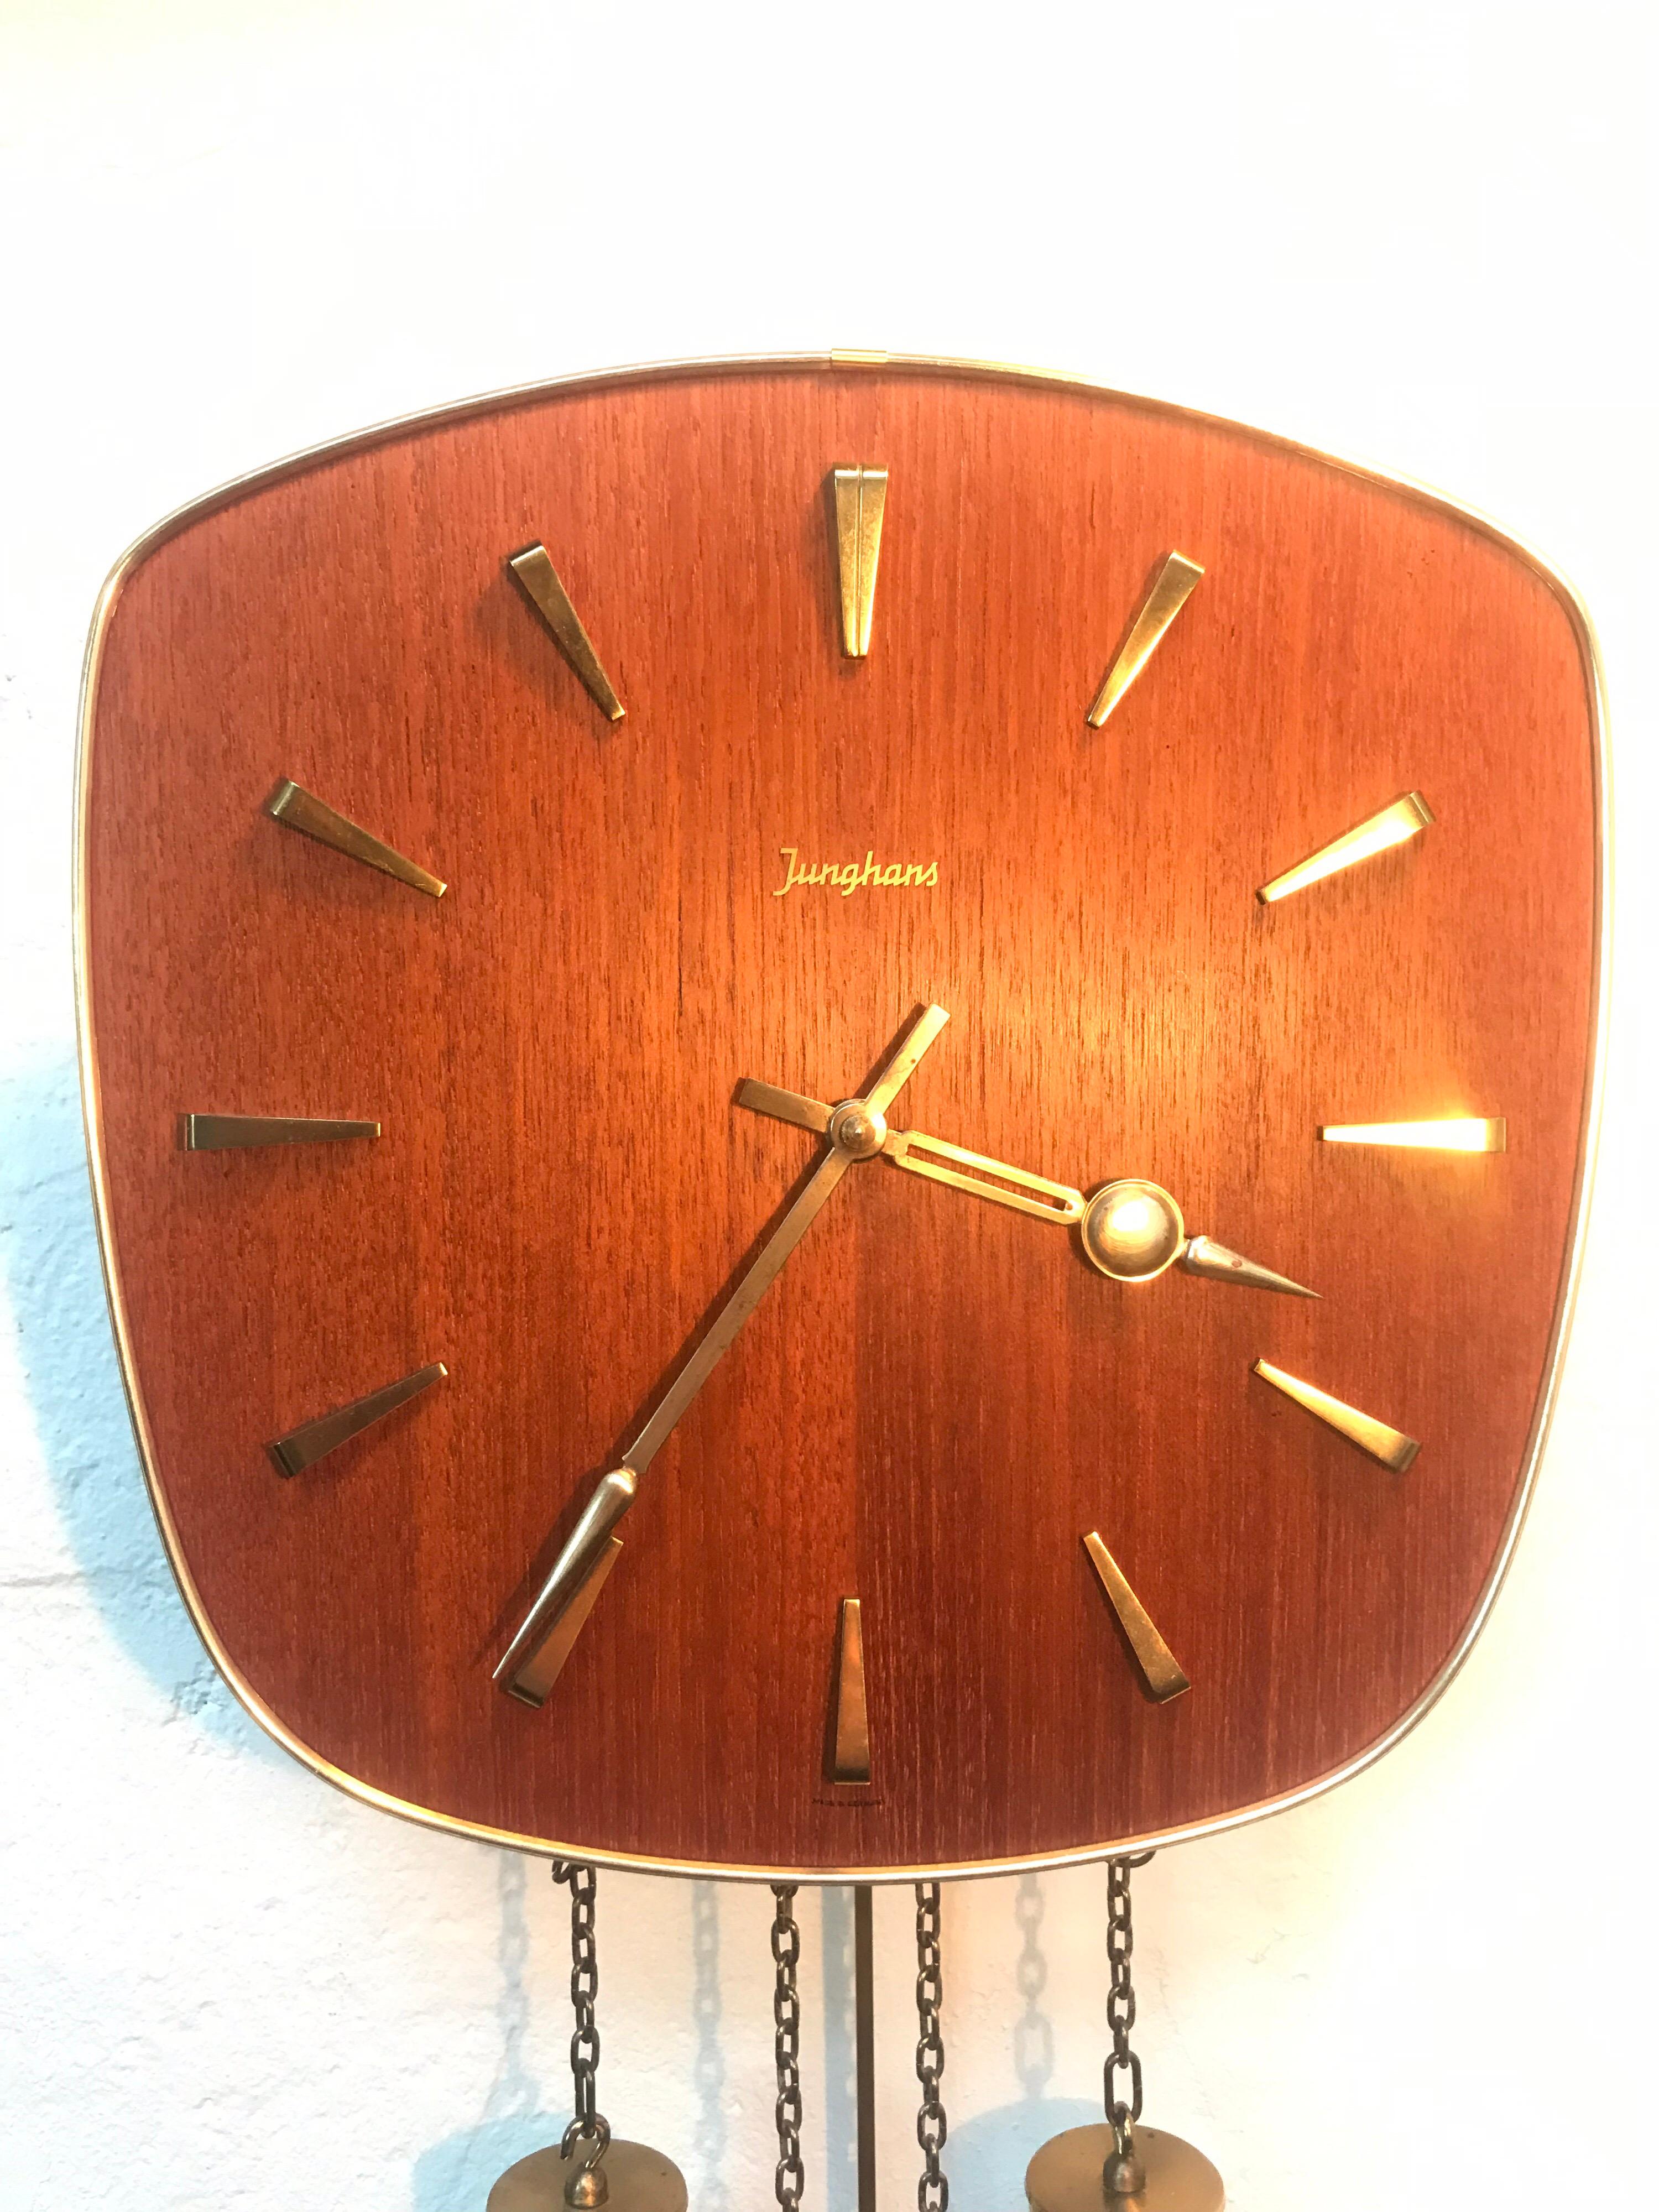 Vintage Junghans pendulum wall clock from the 1960s In Teak with brass fittings.
In lovely working condition and with chimes on the half and whole hour that can be switched off if so desired.
Worldwide shipping responsibly and professionally